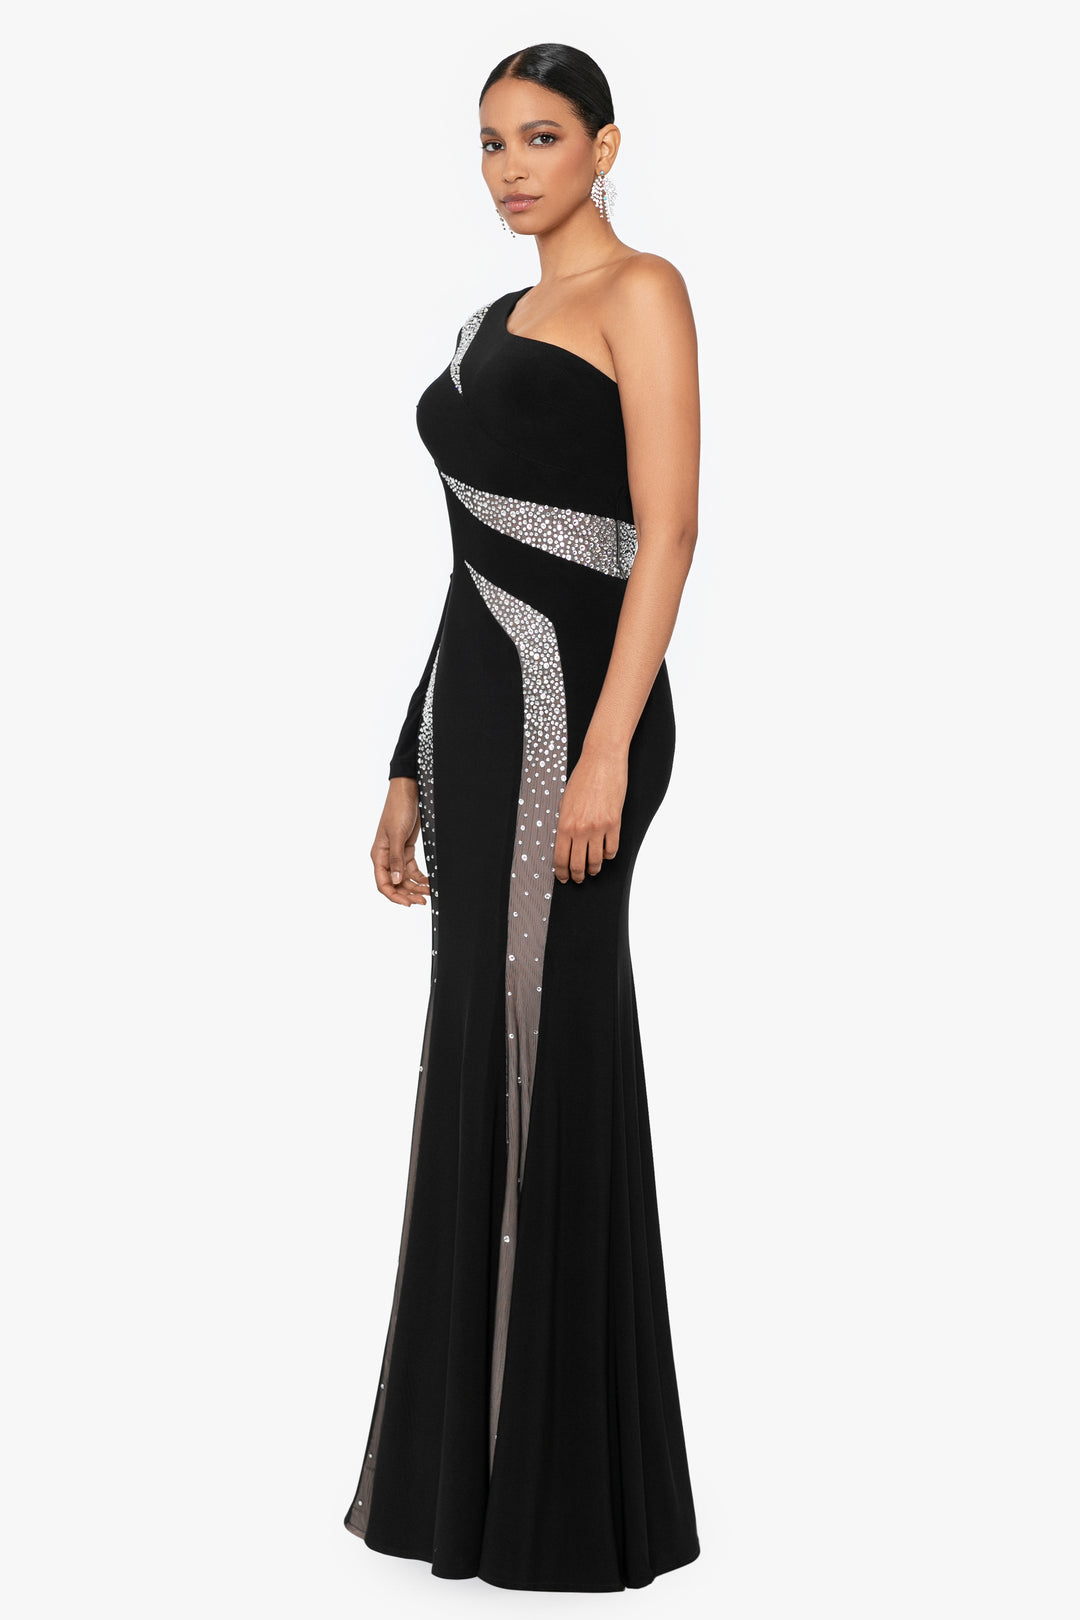 "Tal" Long One Shoulder Beaded Cut Out Dress